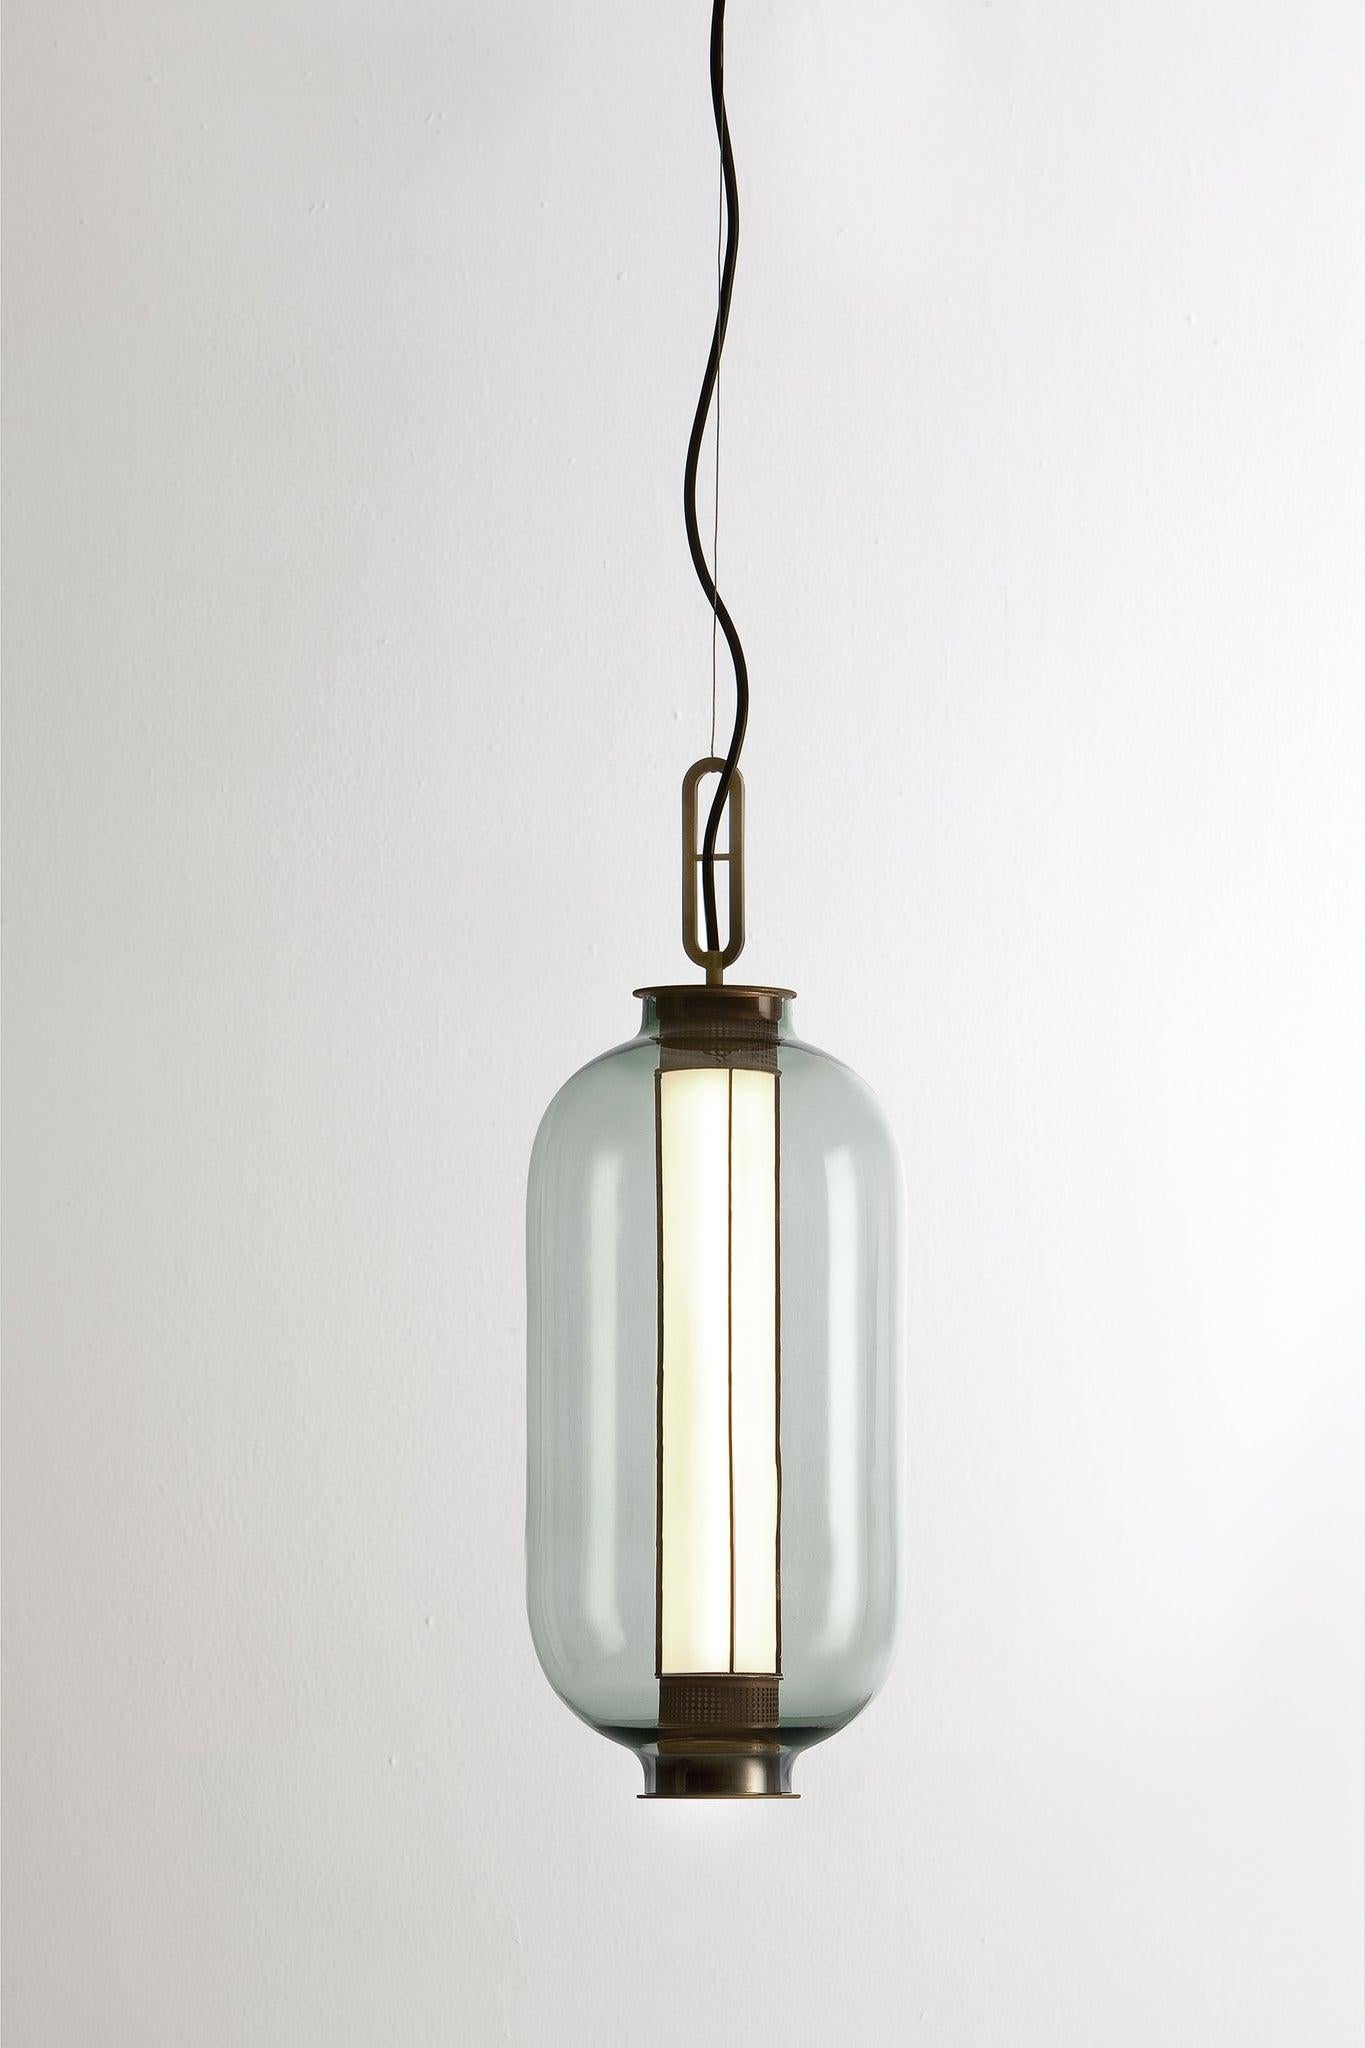 BAI T BA BA

Suspension lamp, model BAI T BA BA, designed by Neri & Hu in 2014. 
Manufactured by Parachilna. 

This collection is inspired by traditional Chinese lanterns. This version however, is a sophisticated one. Made of an aged bronze metallic